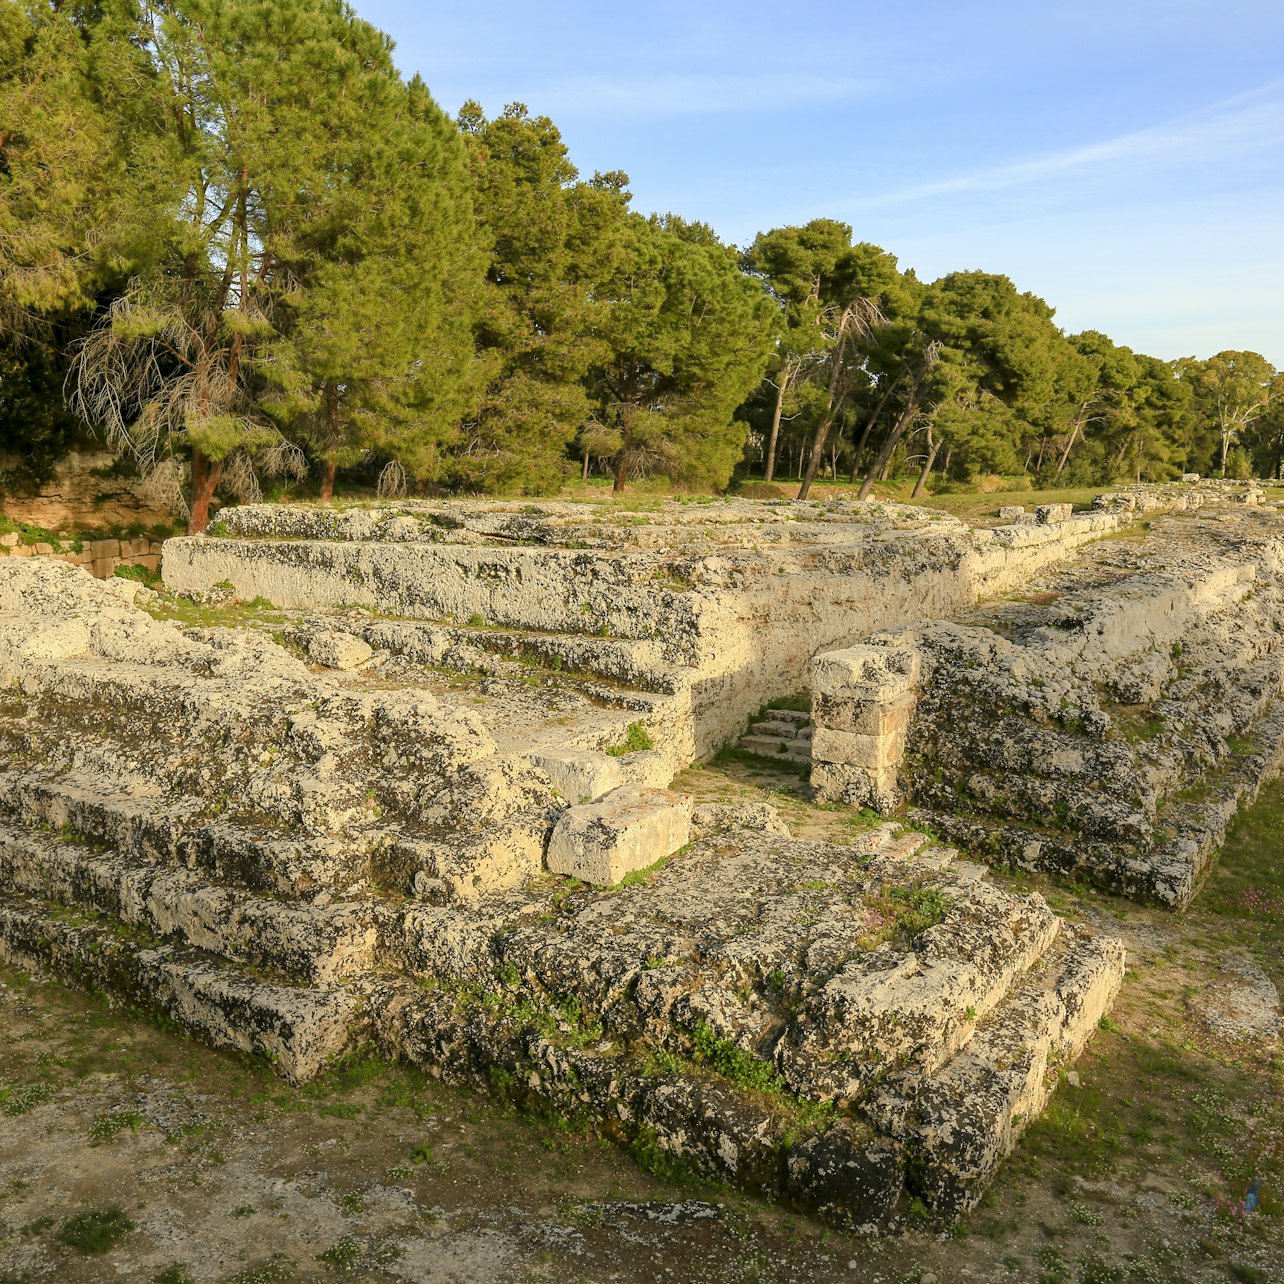 Neapolis Archaeological Park – Greek Theater of Syracuse - Accommodations in Syracuse